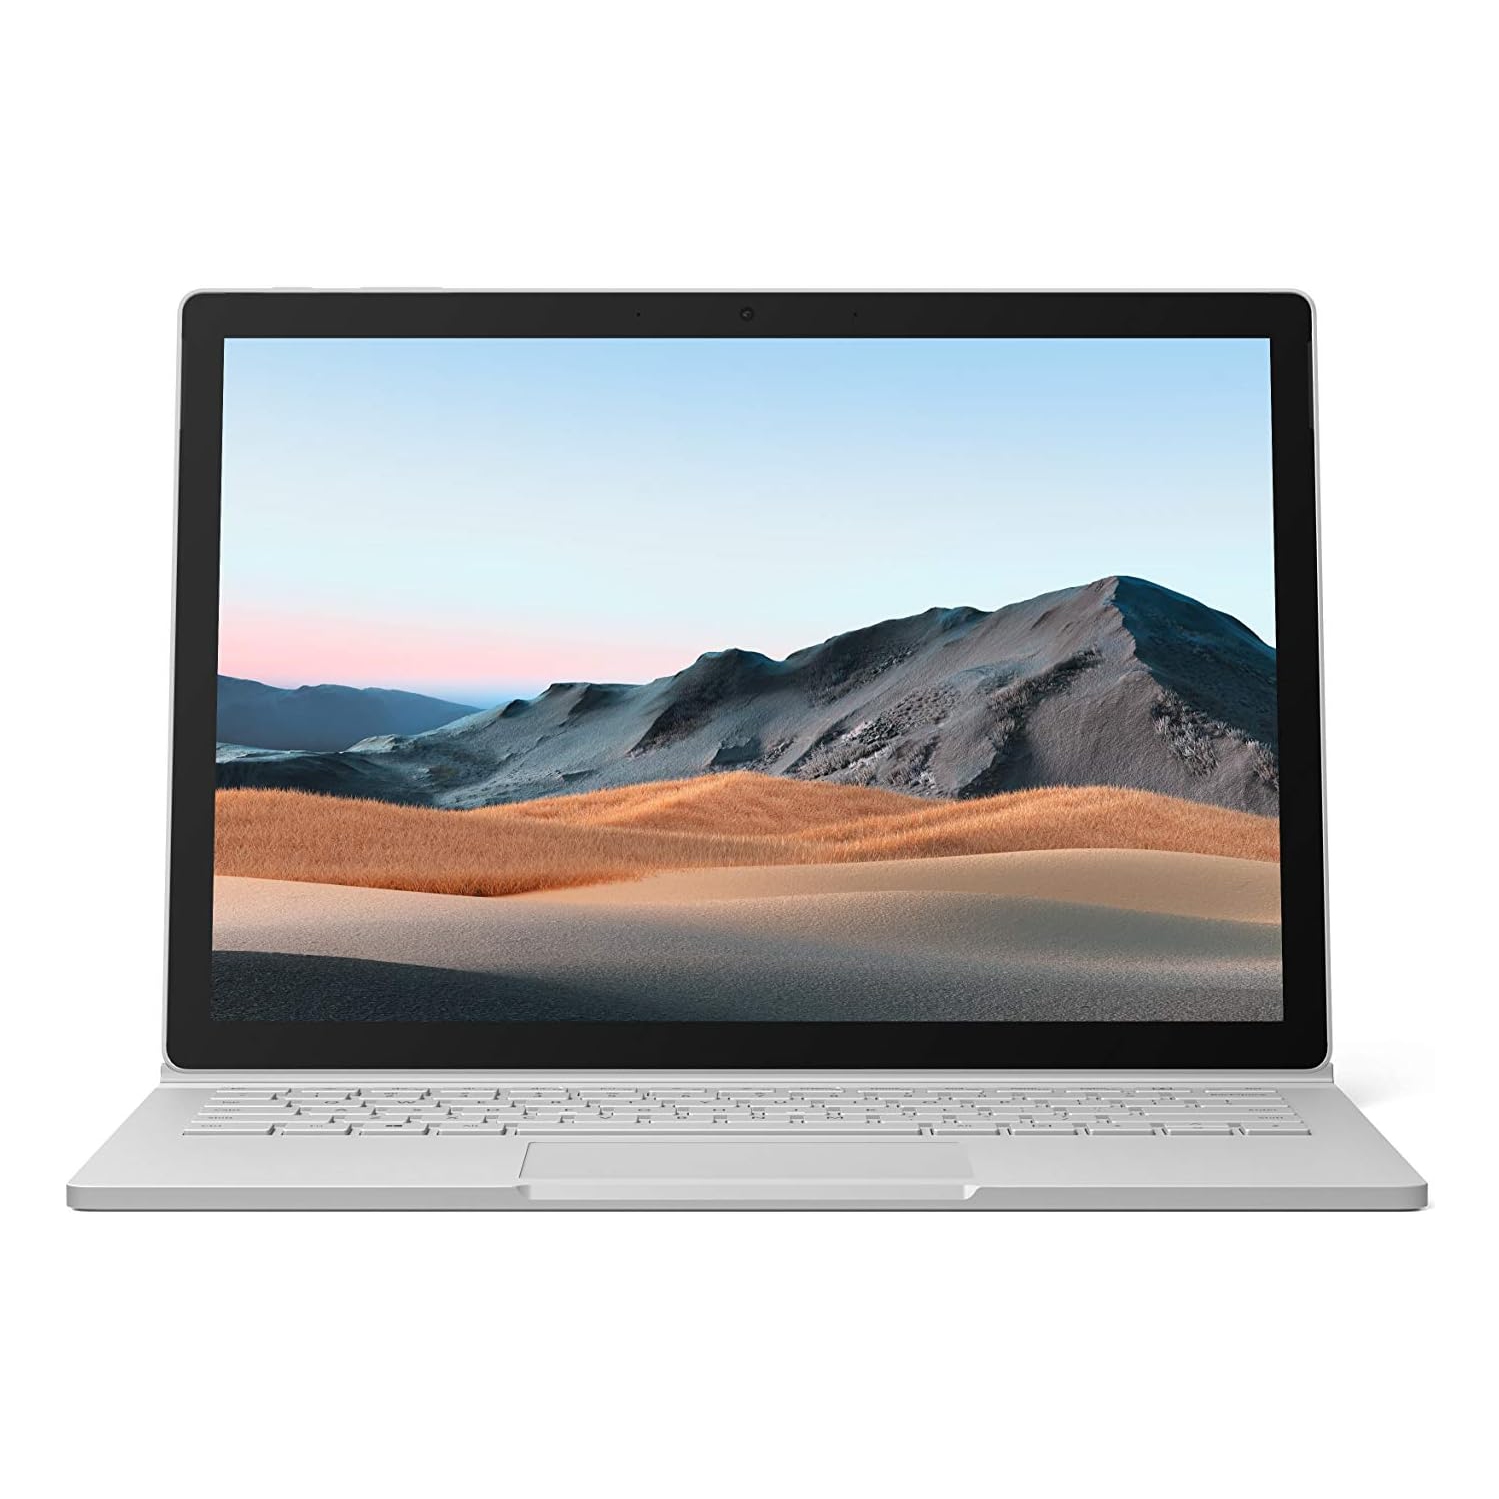 Refurbished (Good) - Microsoft Surface Book 13.5" Touch Screen 2-in-1 Laptop, Intel Core i5-6th Gen. 2.4GHz, 8GB RAM, 256GB Storage, Windows 10 Pro. (Pen not Included)